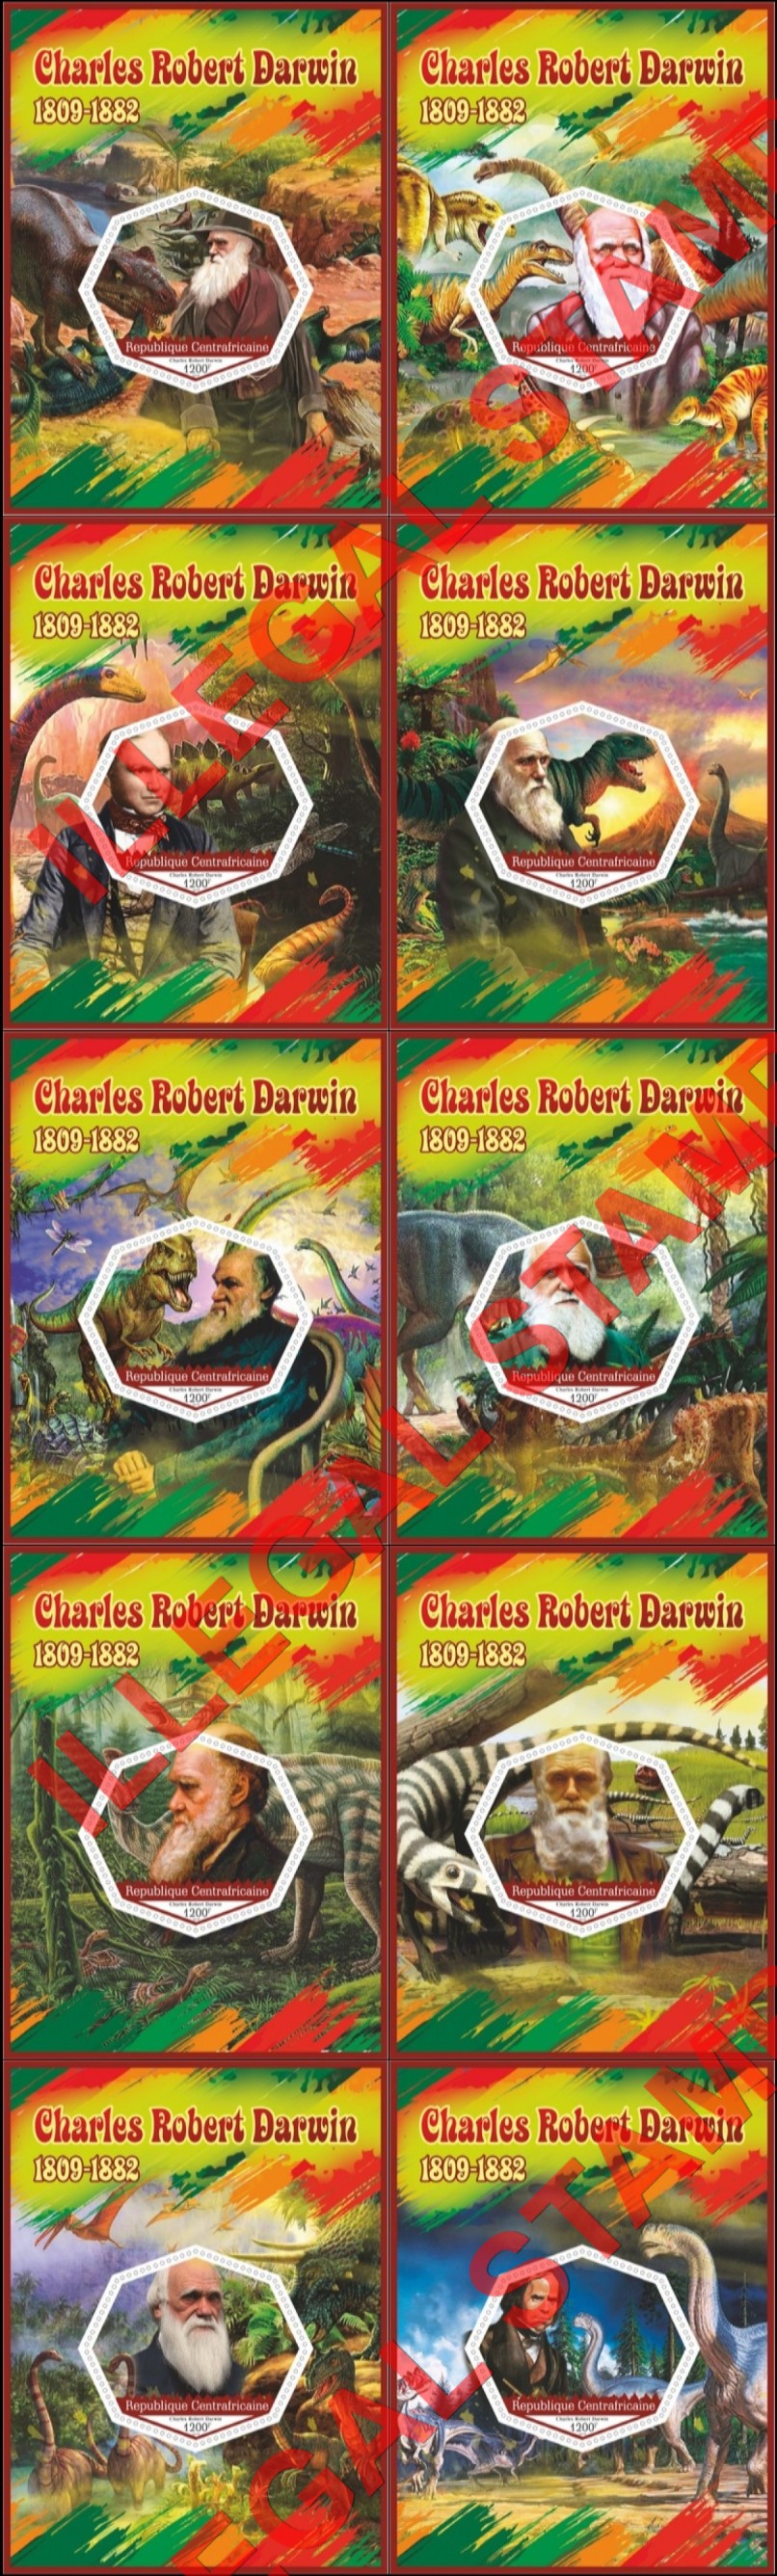 Central African Republic 2019 Charles Darwin and Dinosaurs Illegal Stamp Souvenir Sheets of 1